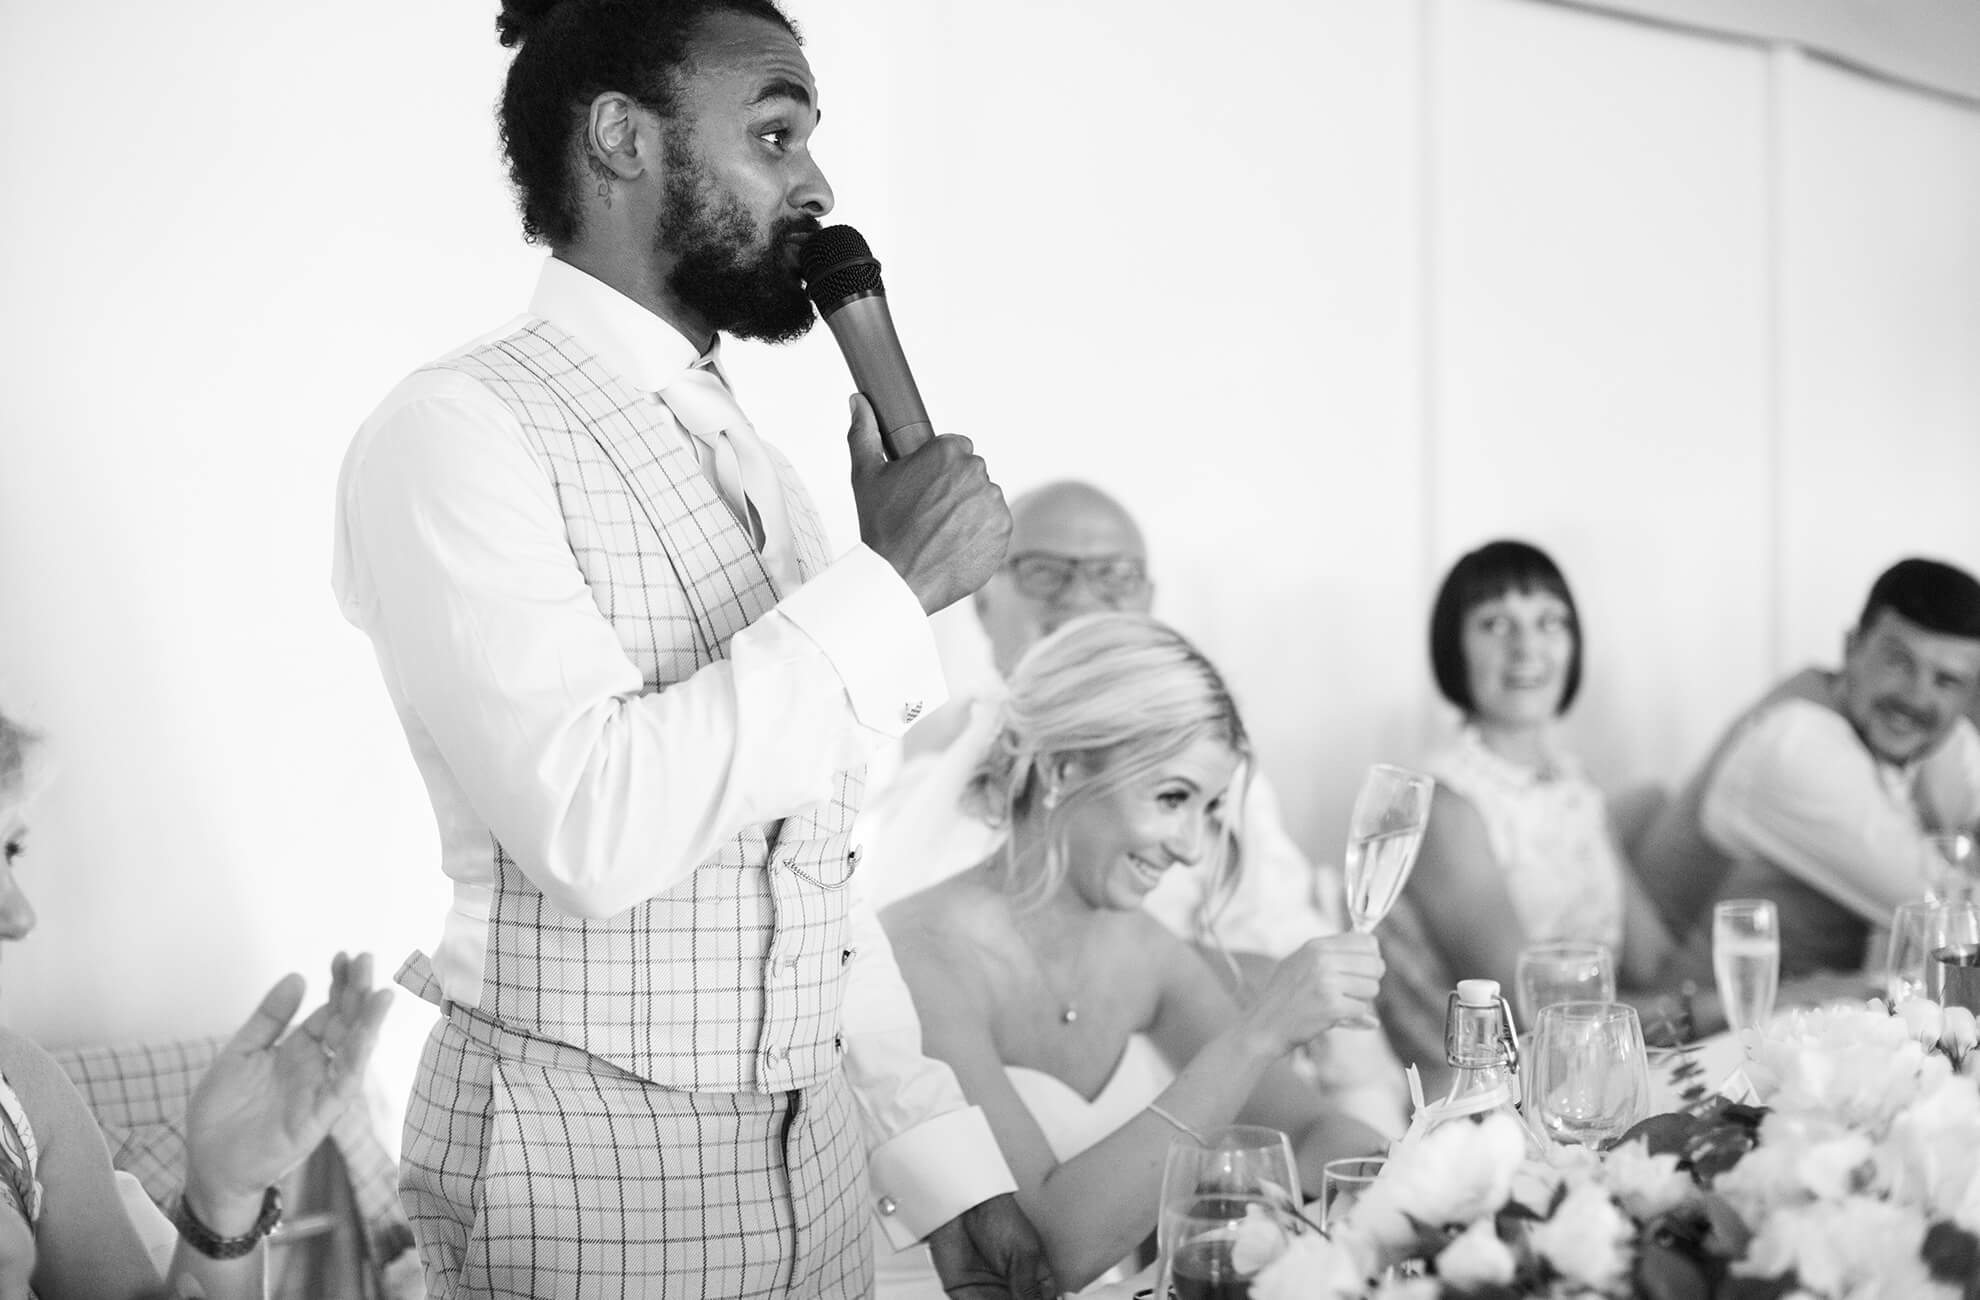 The groom makes wedding guests laugh as he proceeds with his wedding speech at Combermere Abbey